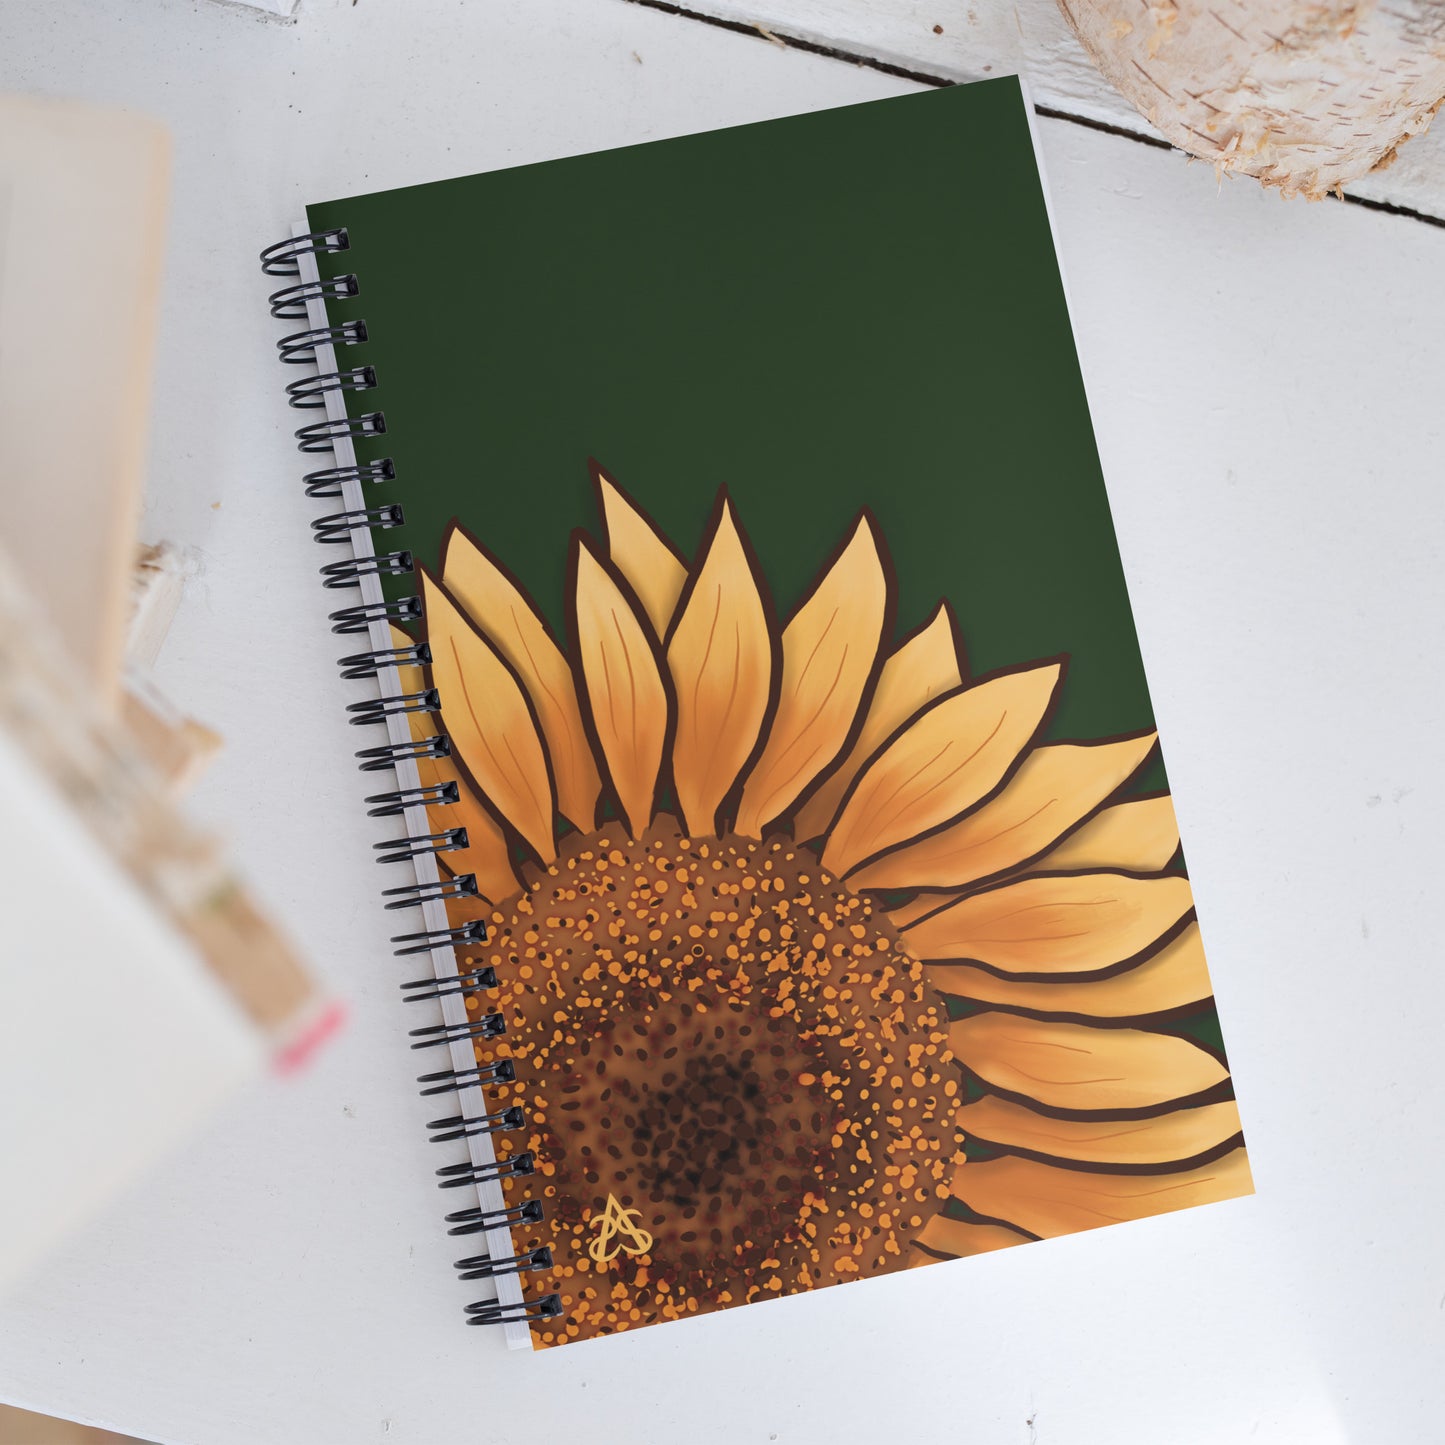 A spiral notebook has a large painted sunflower coming from one corner on a forest green background.